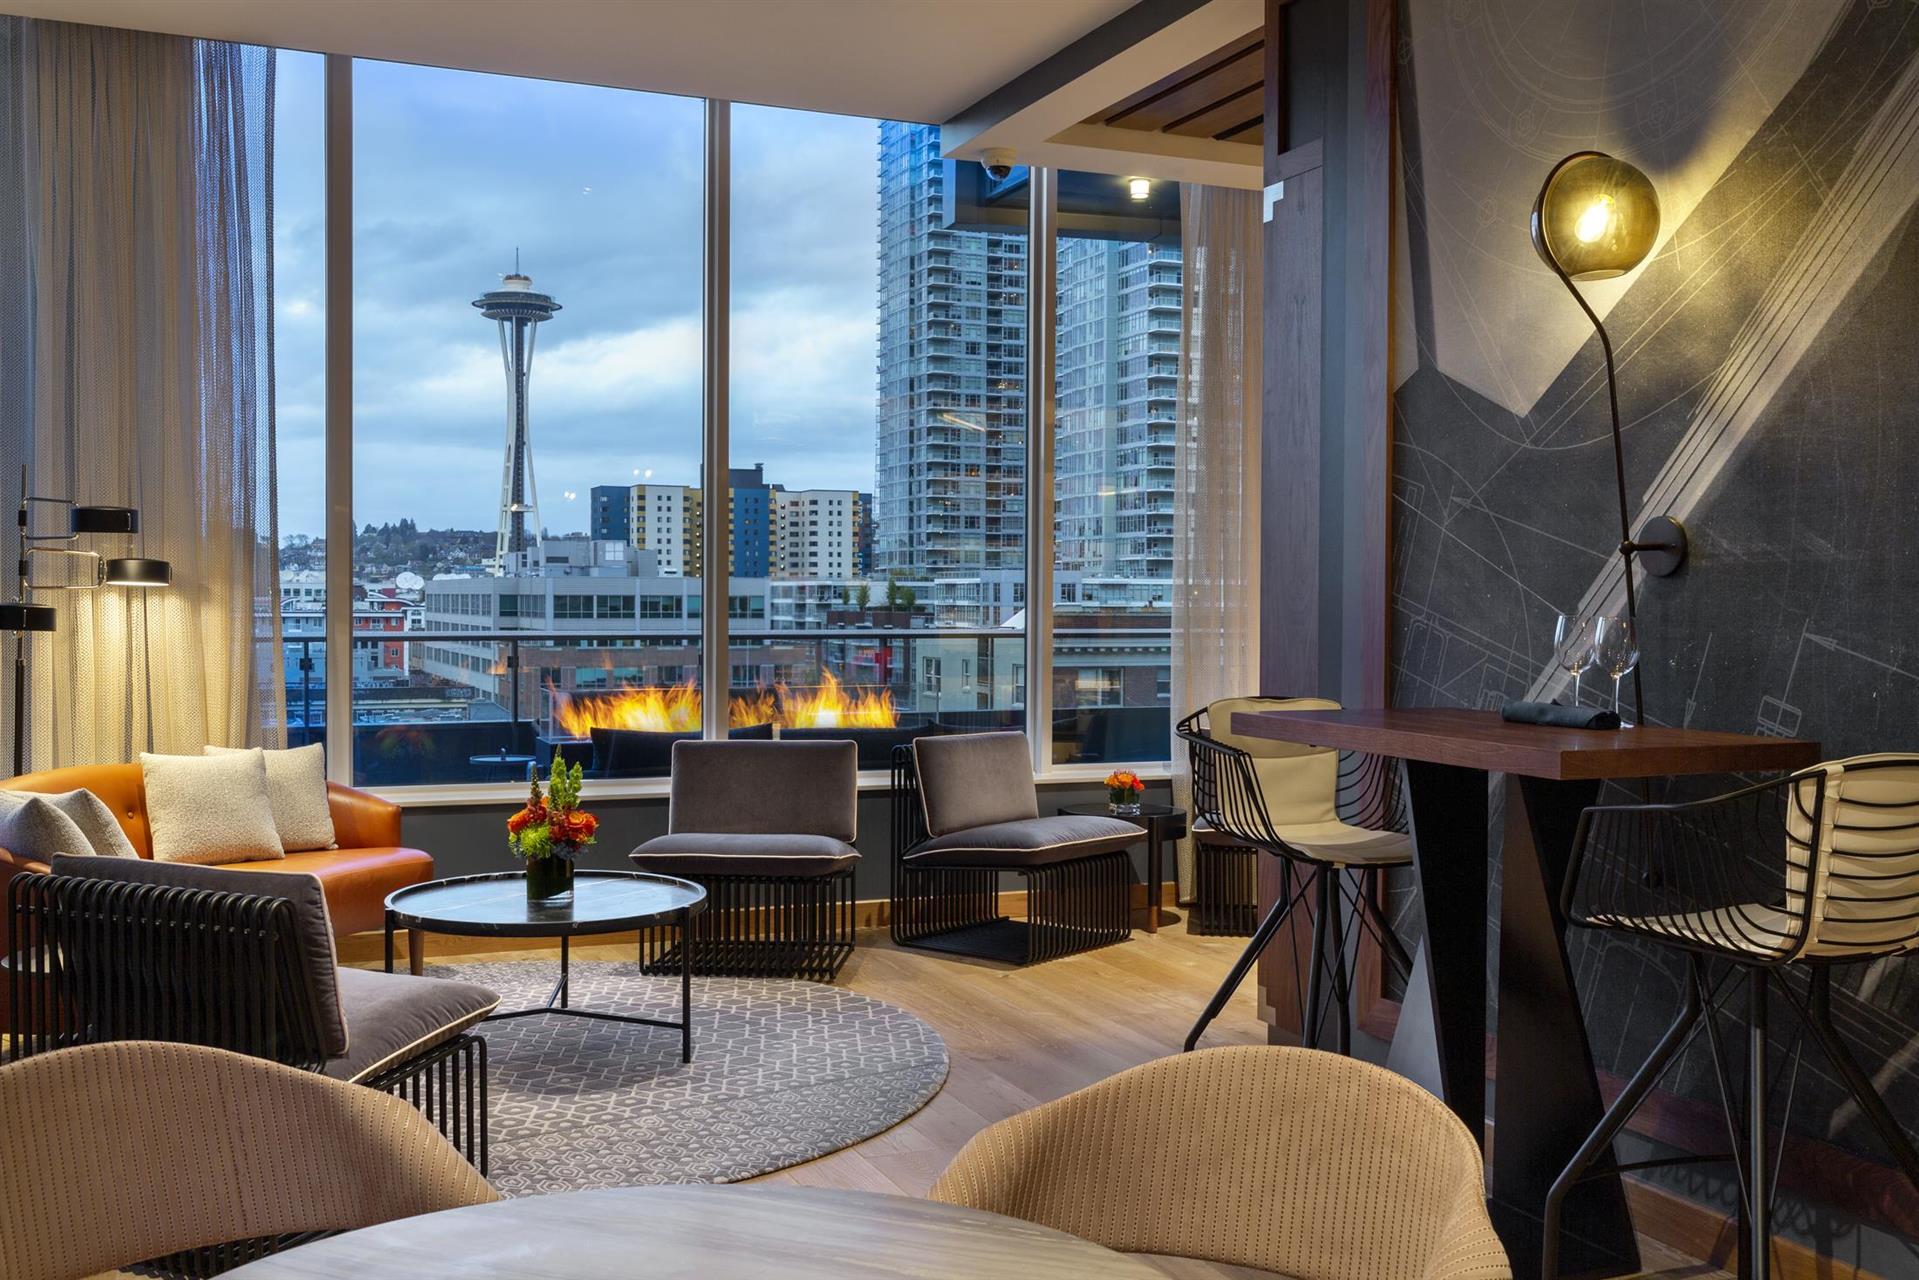 The Sound Hotel Seattle Belltown, Tapestry Collection by Hilton in Seattle, WA